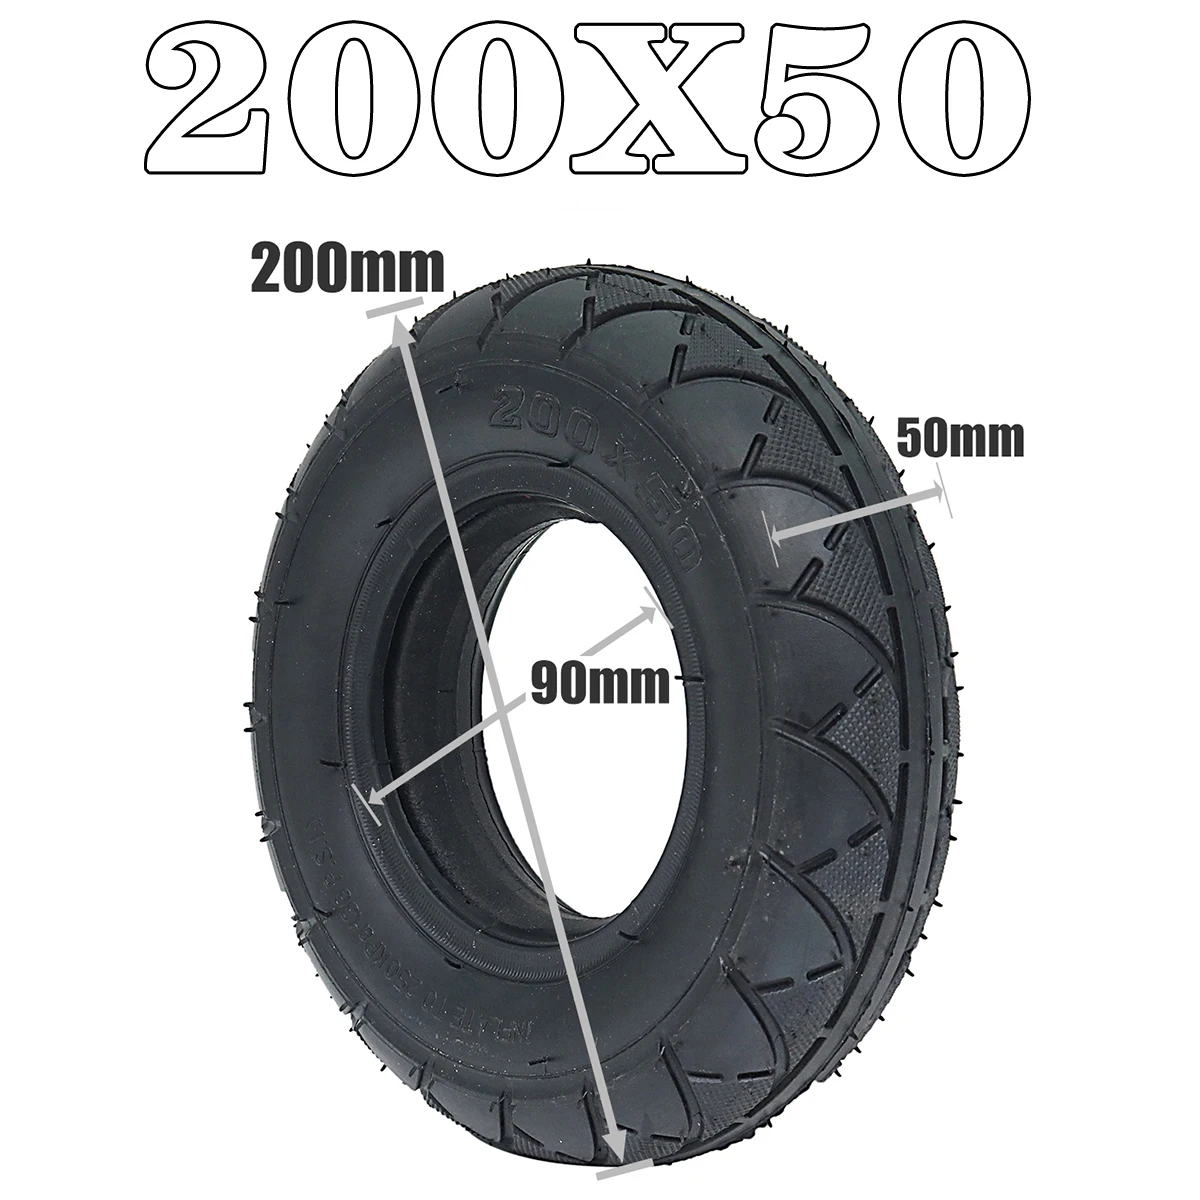 

Good Quality Solid Tubeless Tire 200 X 50 (8x2) Solid/foam Filled Tire 200x50 for Razor E100 E125 E200 Scooter